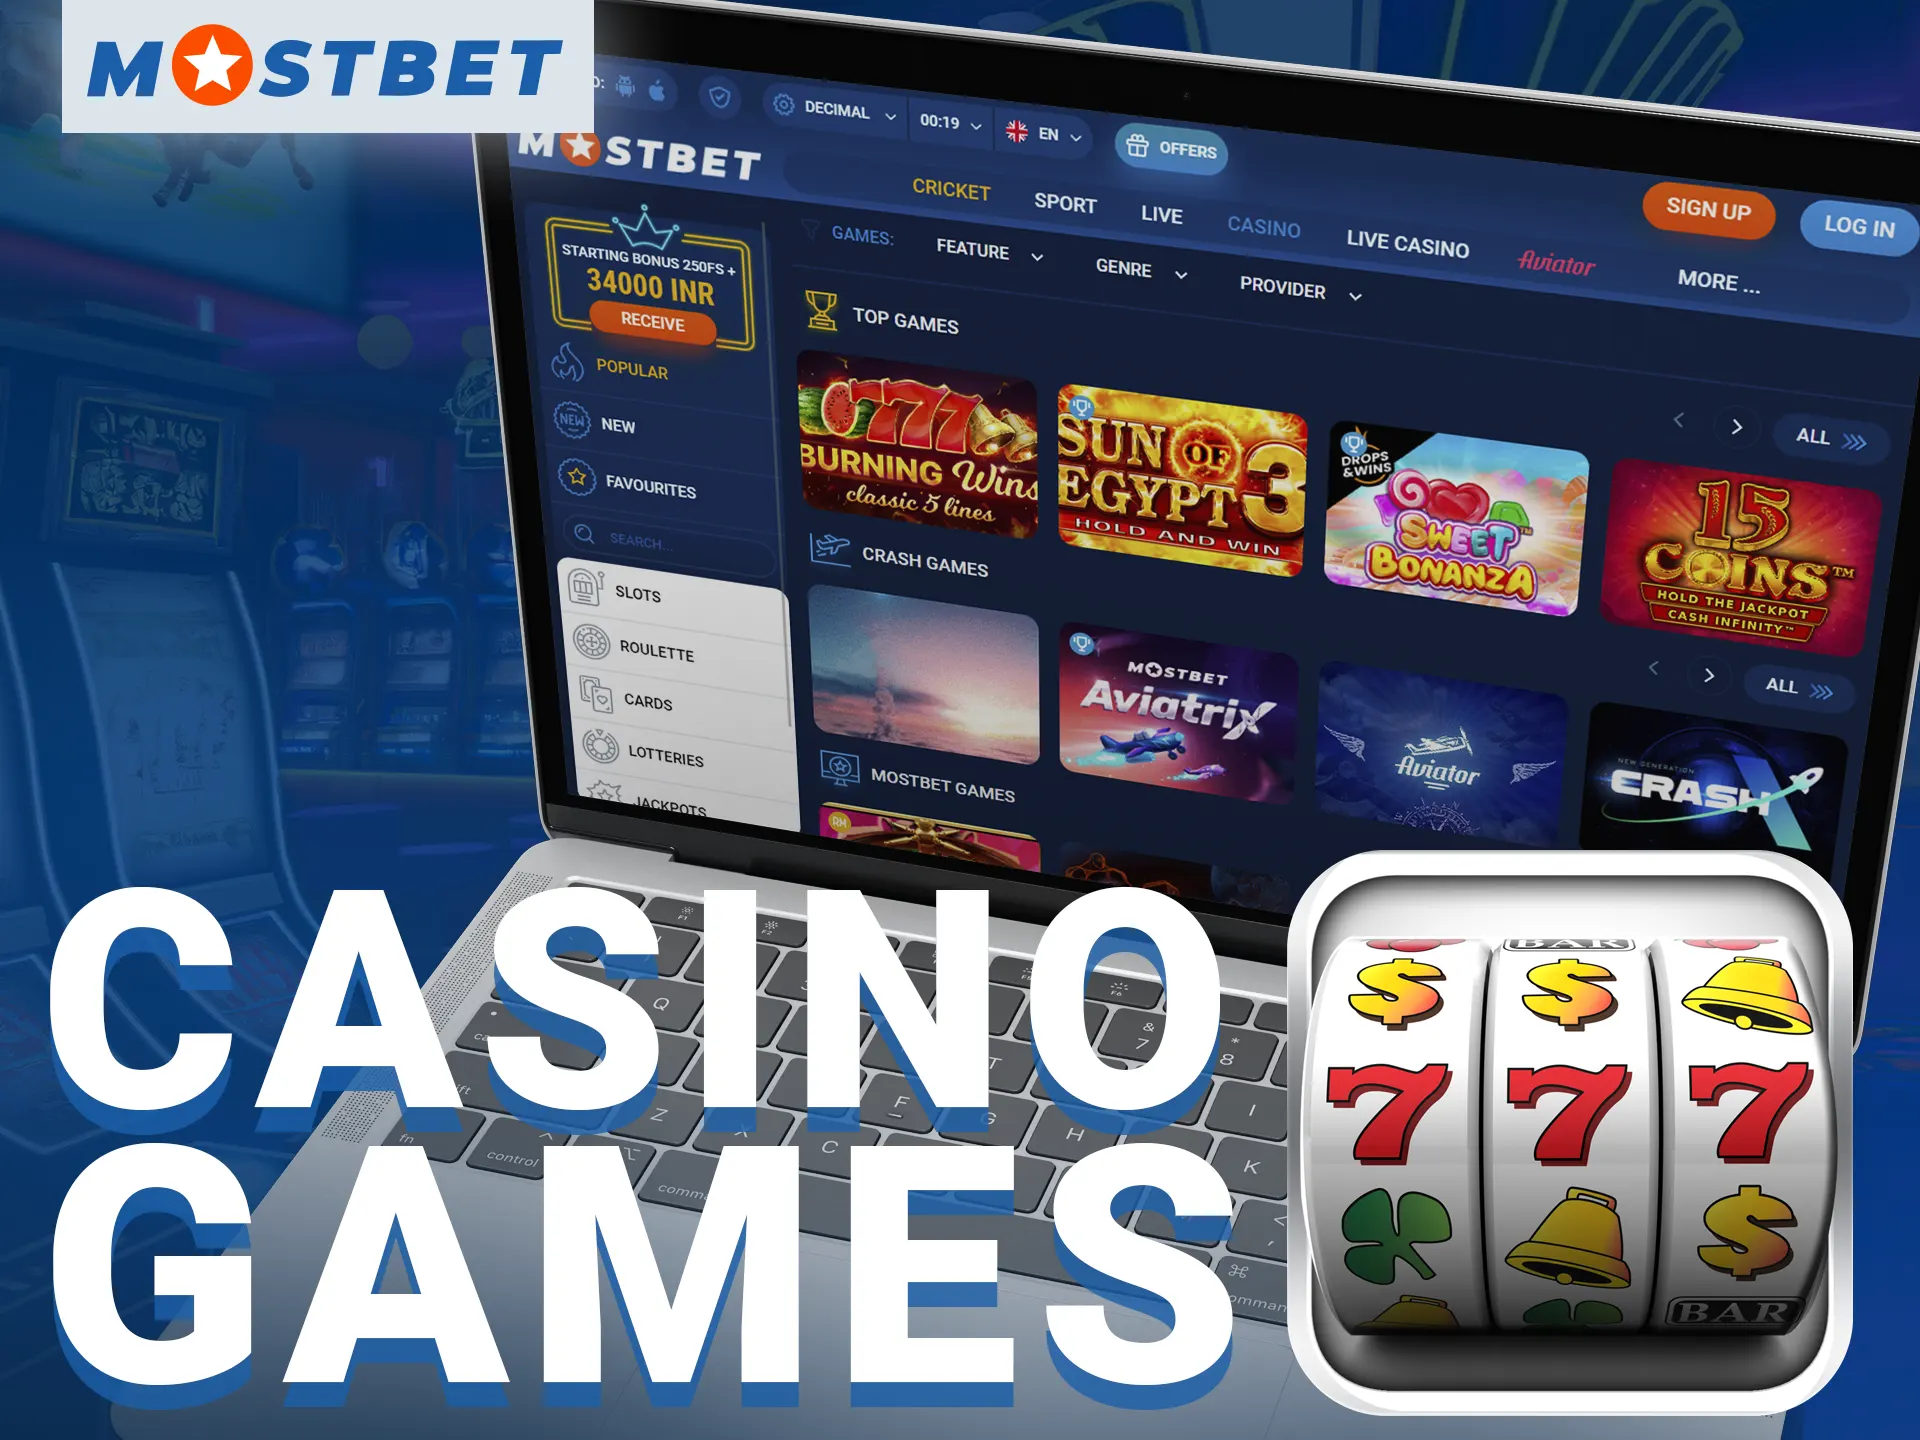 With regular additions of new games, Mostbet's casino section ensures a diverse array.